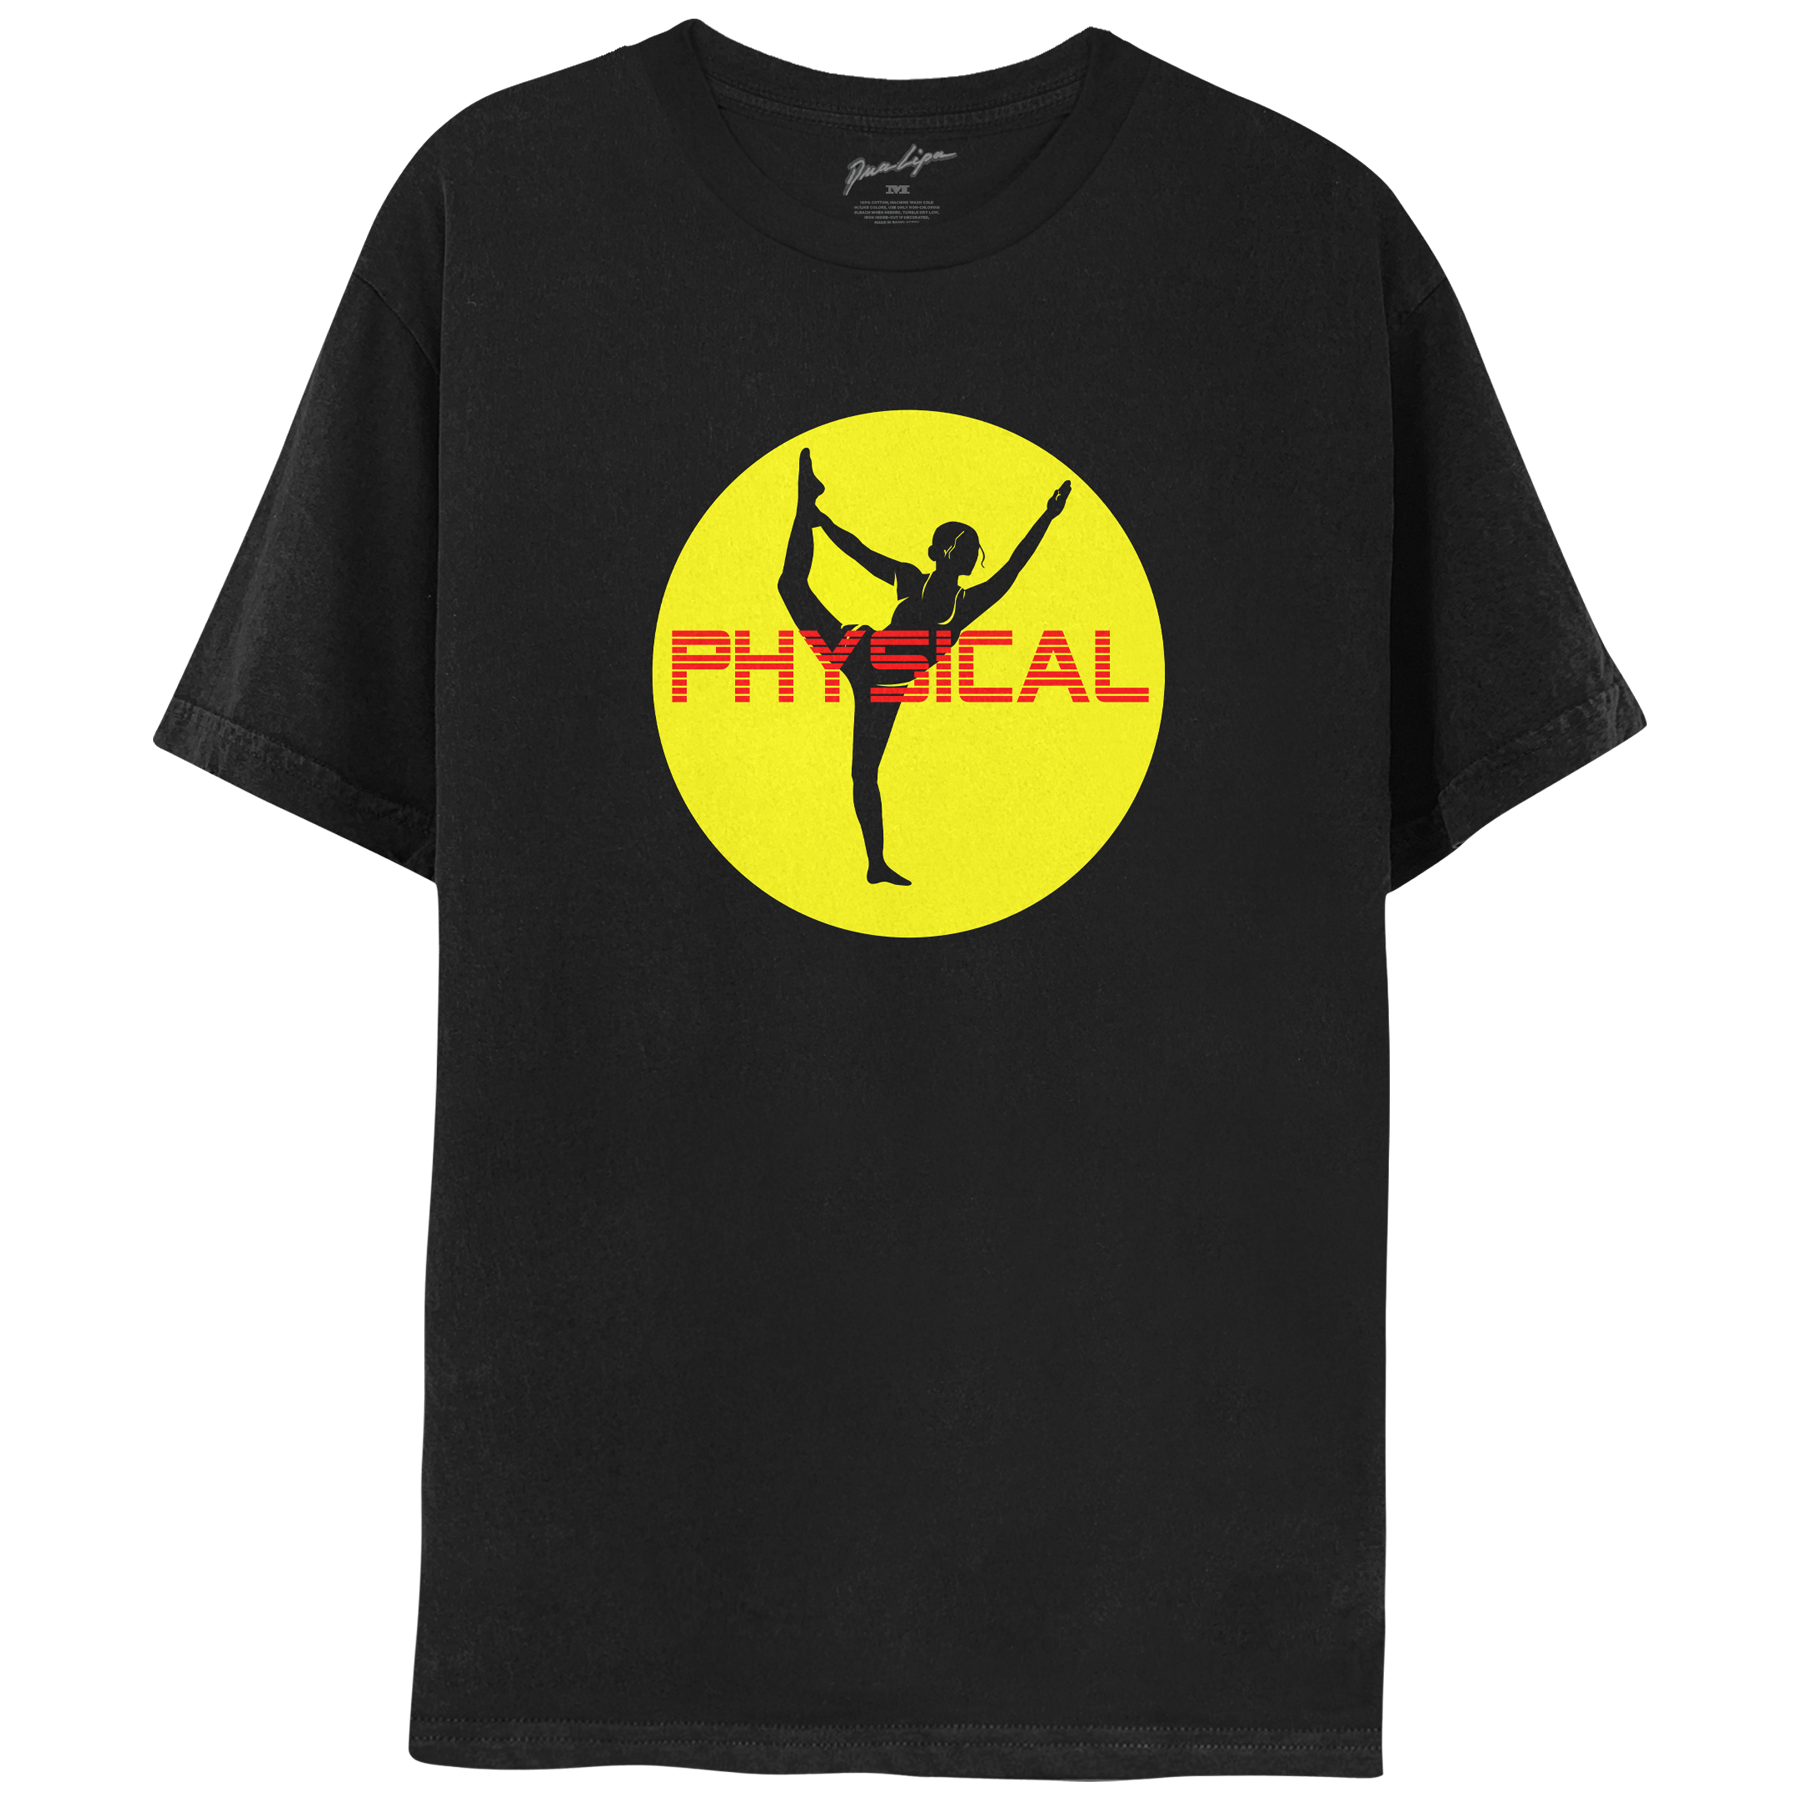 LET'S GET PHYSICAL UNISEX TEE